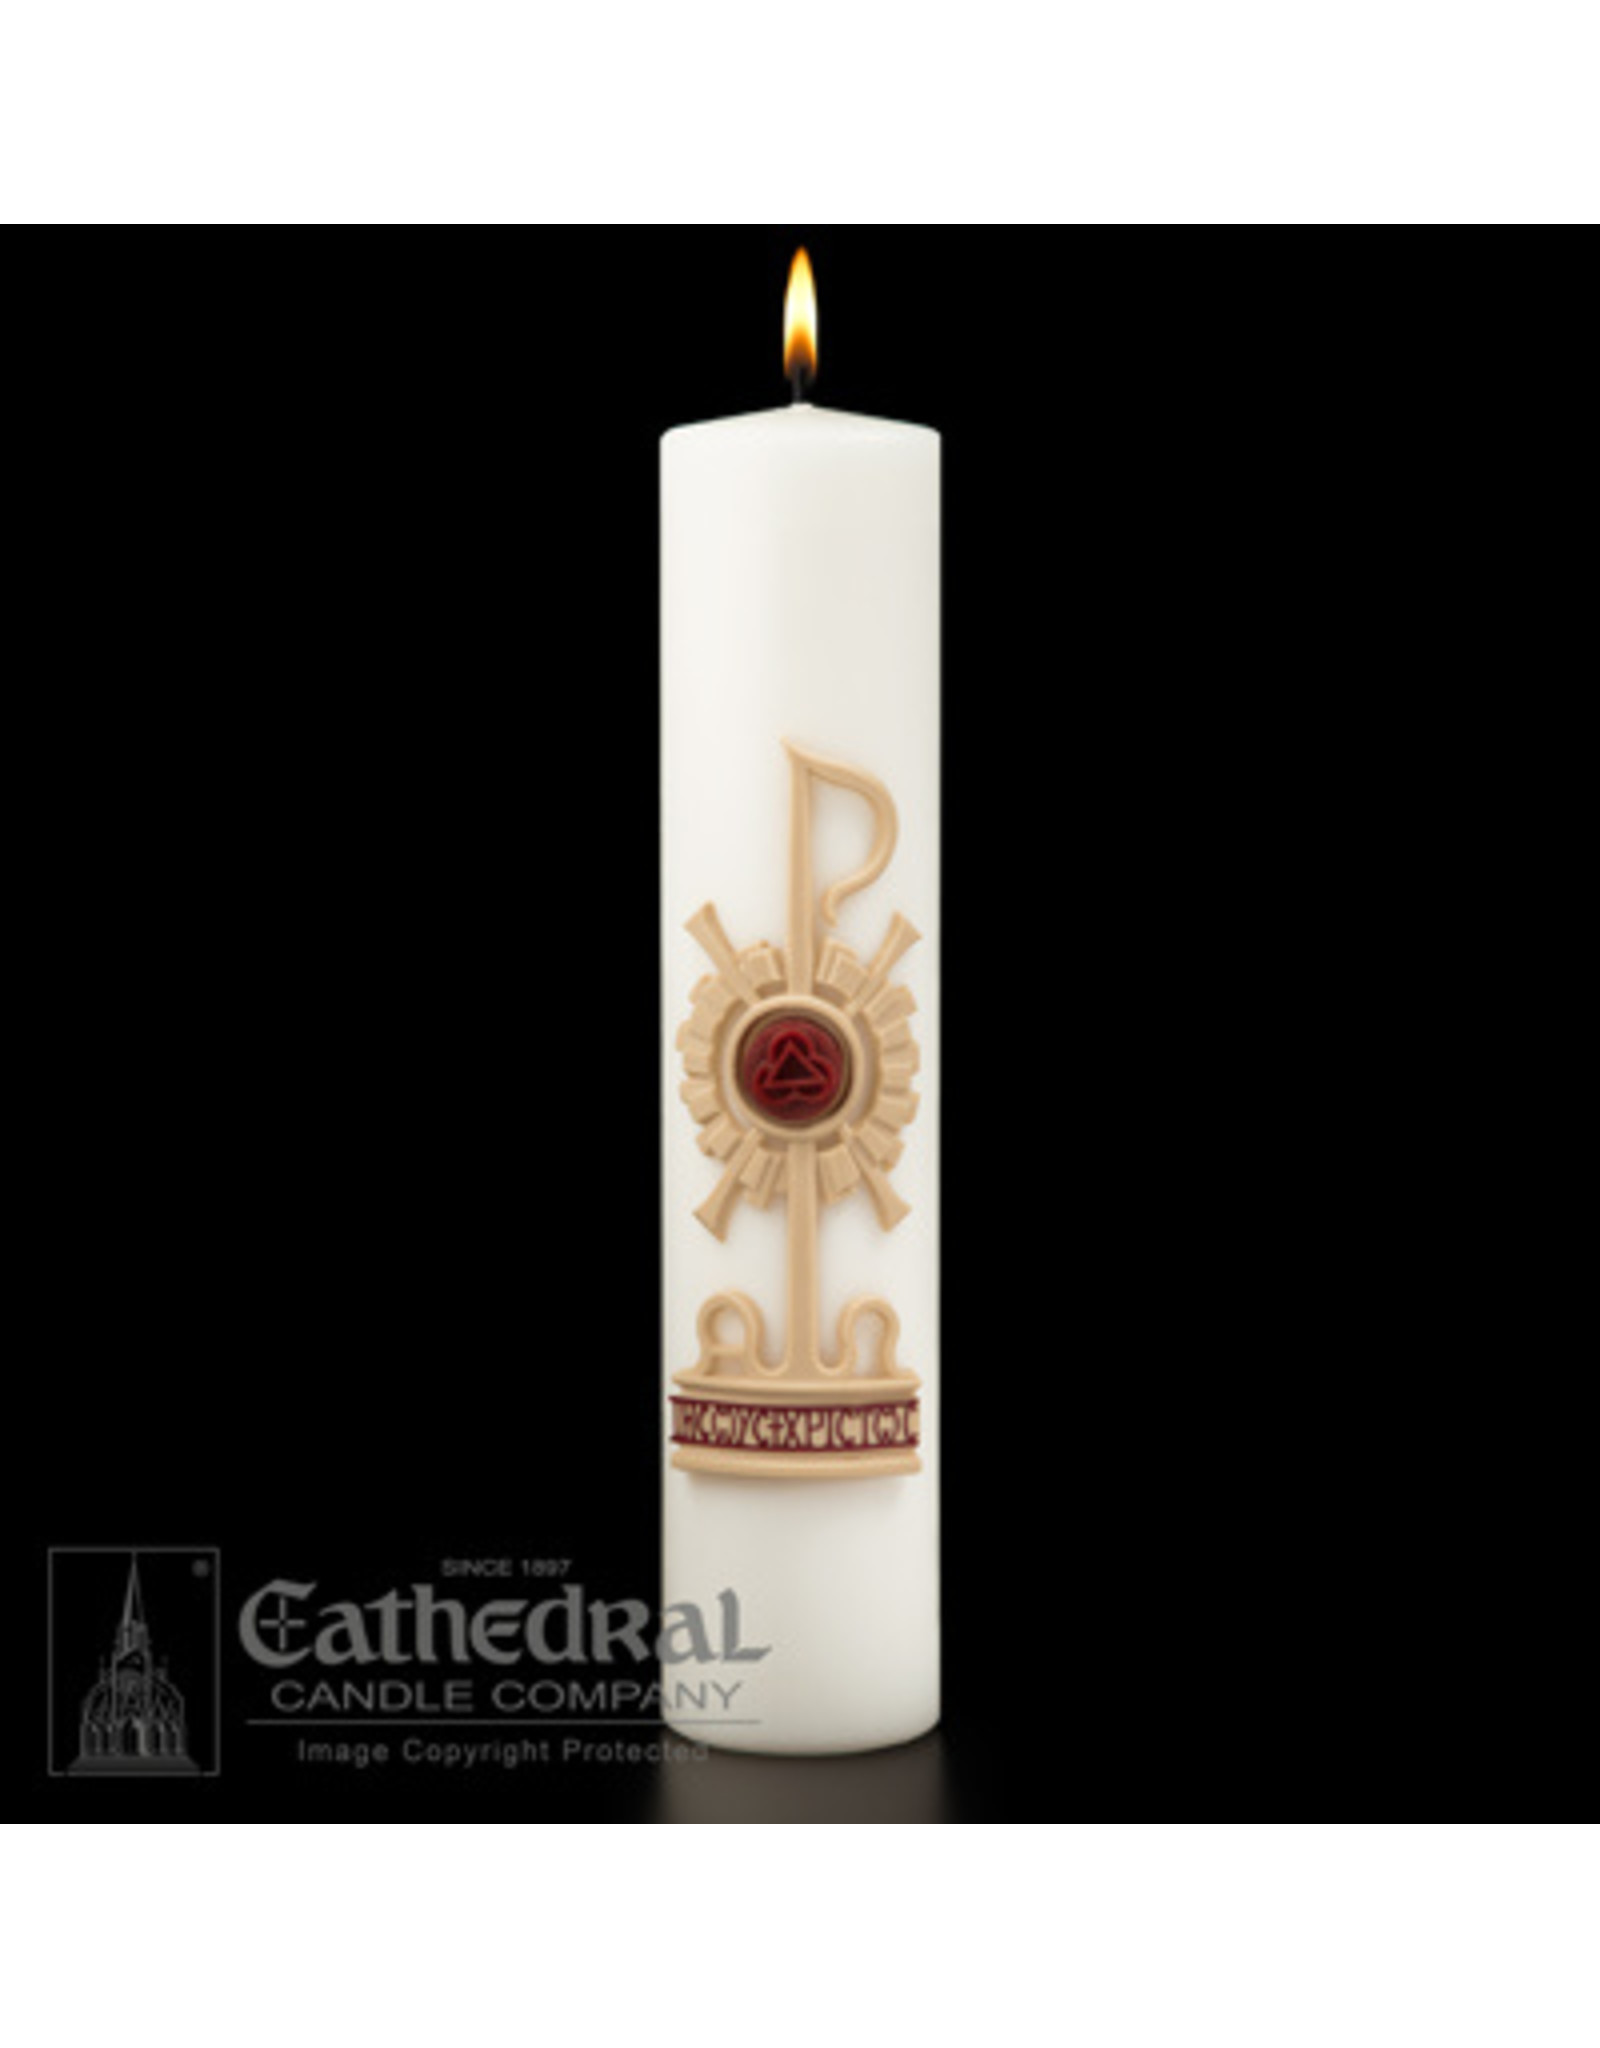 Cathedral Candle Christ Candle - Holy Trinity - 3x14 - Sculptwax